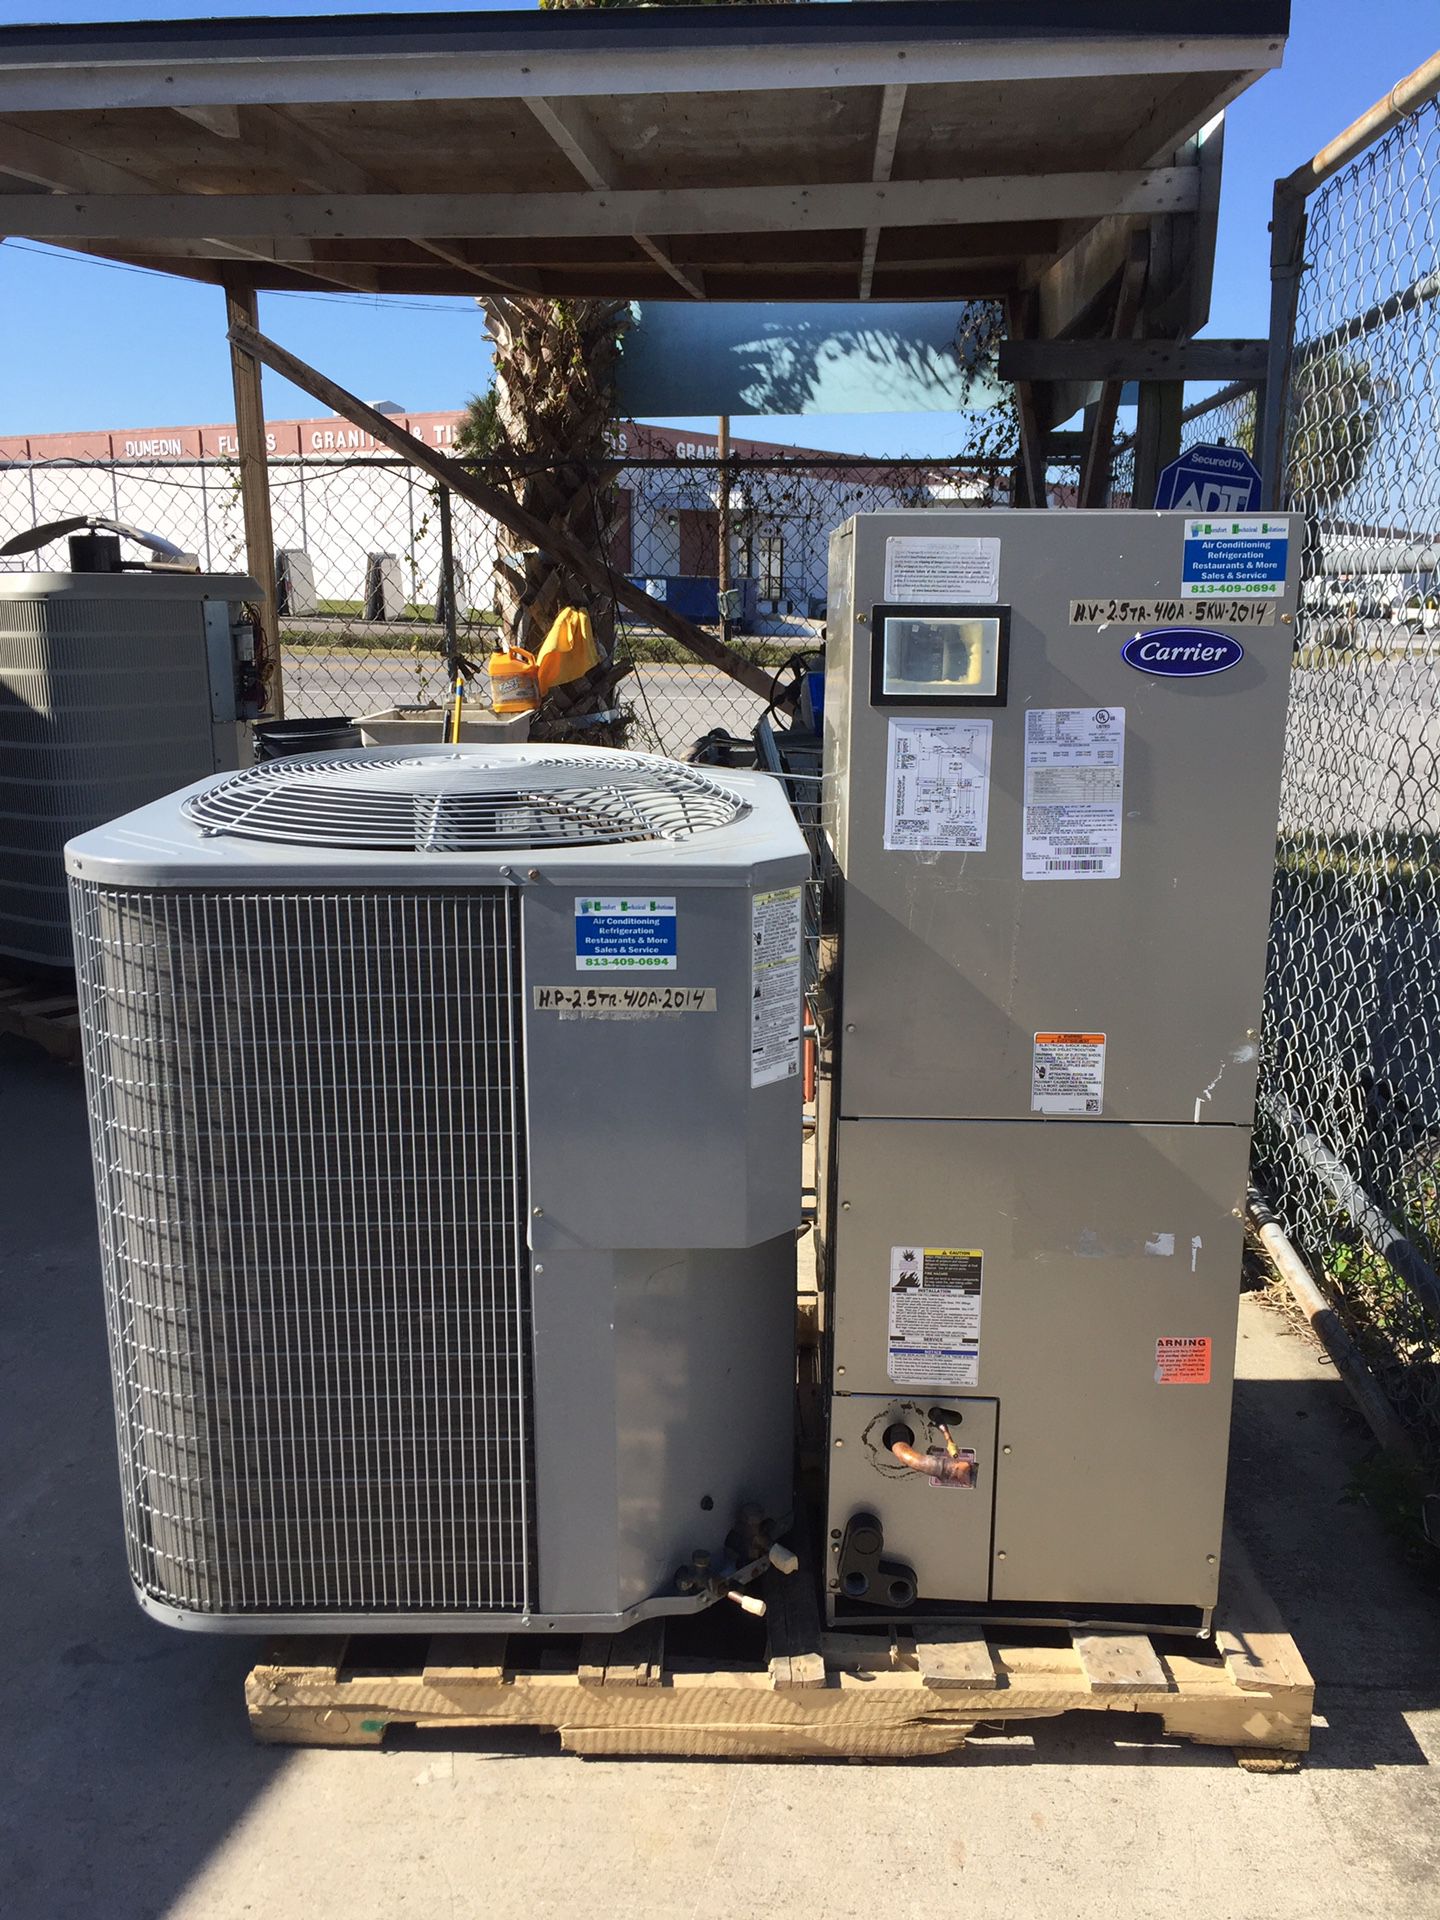 2.5 Ton Carrier heat pump 2014 410-a New Freon Ac air conditioner